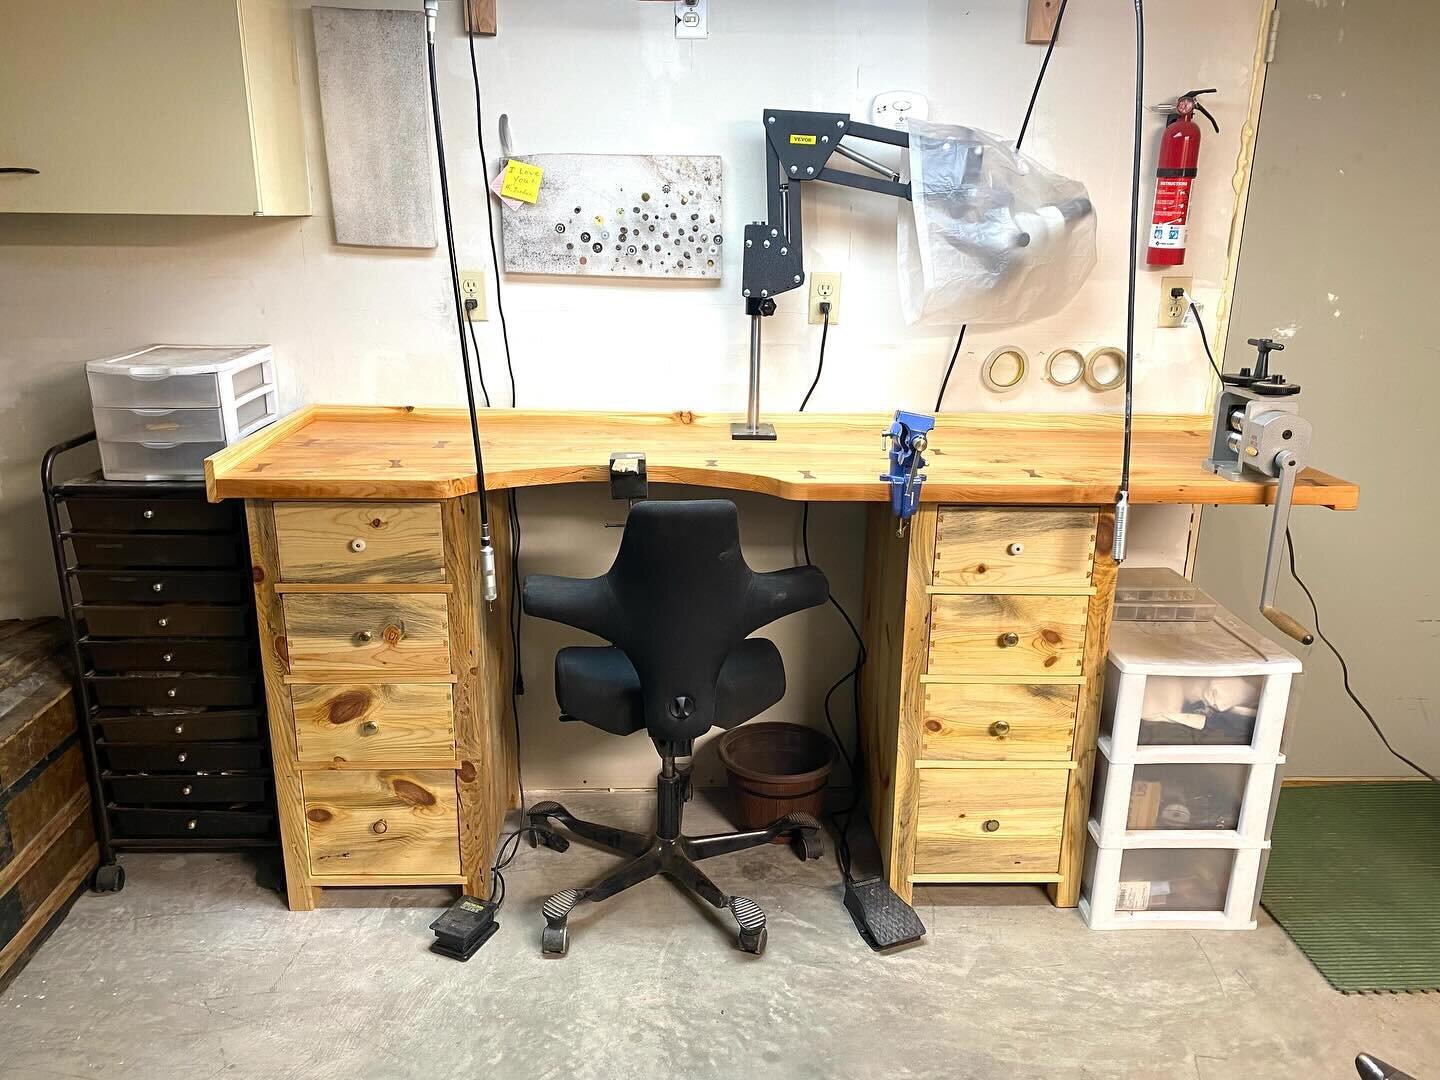 Jorden made me a bench 😍😍😍 I wanted to show it off before it gets covered in projects! It&rsquo;s the most beautiful thing in my studio! 

#theman #newworkbench #repurposedwood #customworkbench #abundant #grateful #jewelersbench #craftsman #skills